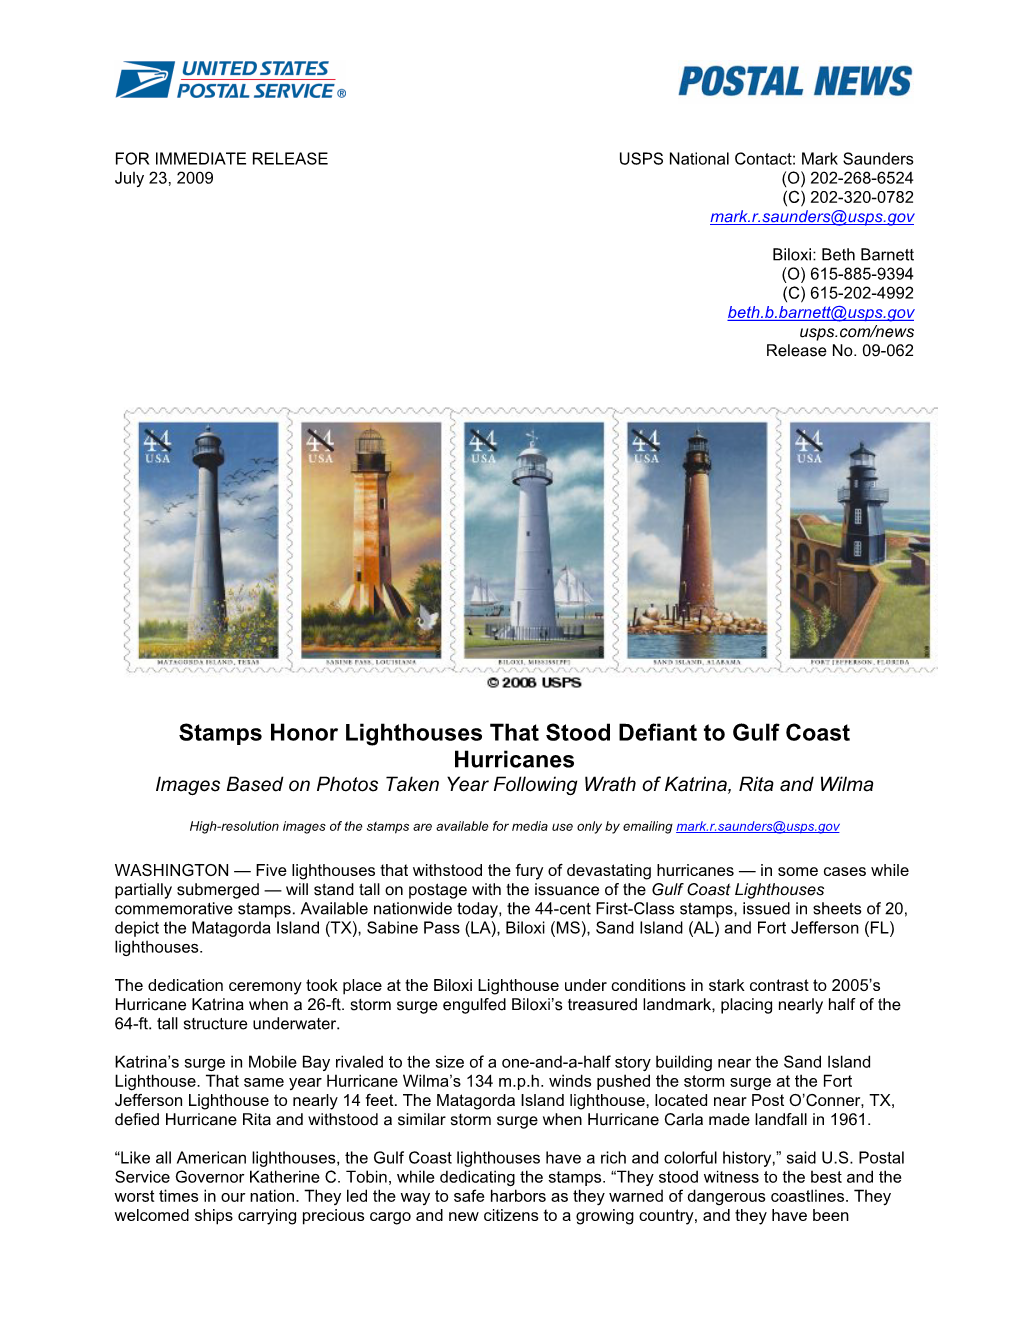 Stamps Honor Lighthouses That Stood Defiant to Gulf Coast Hurricanes Images Based on Photos Taken Year Following Wrath of Katrina, Rita and Wilma